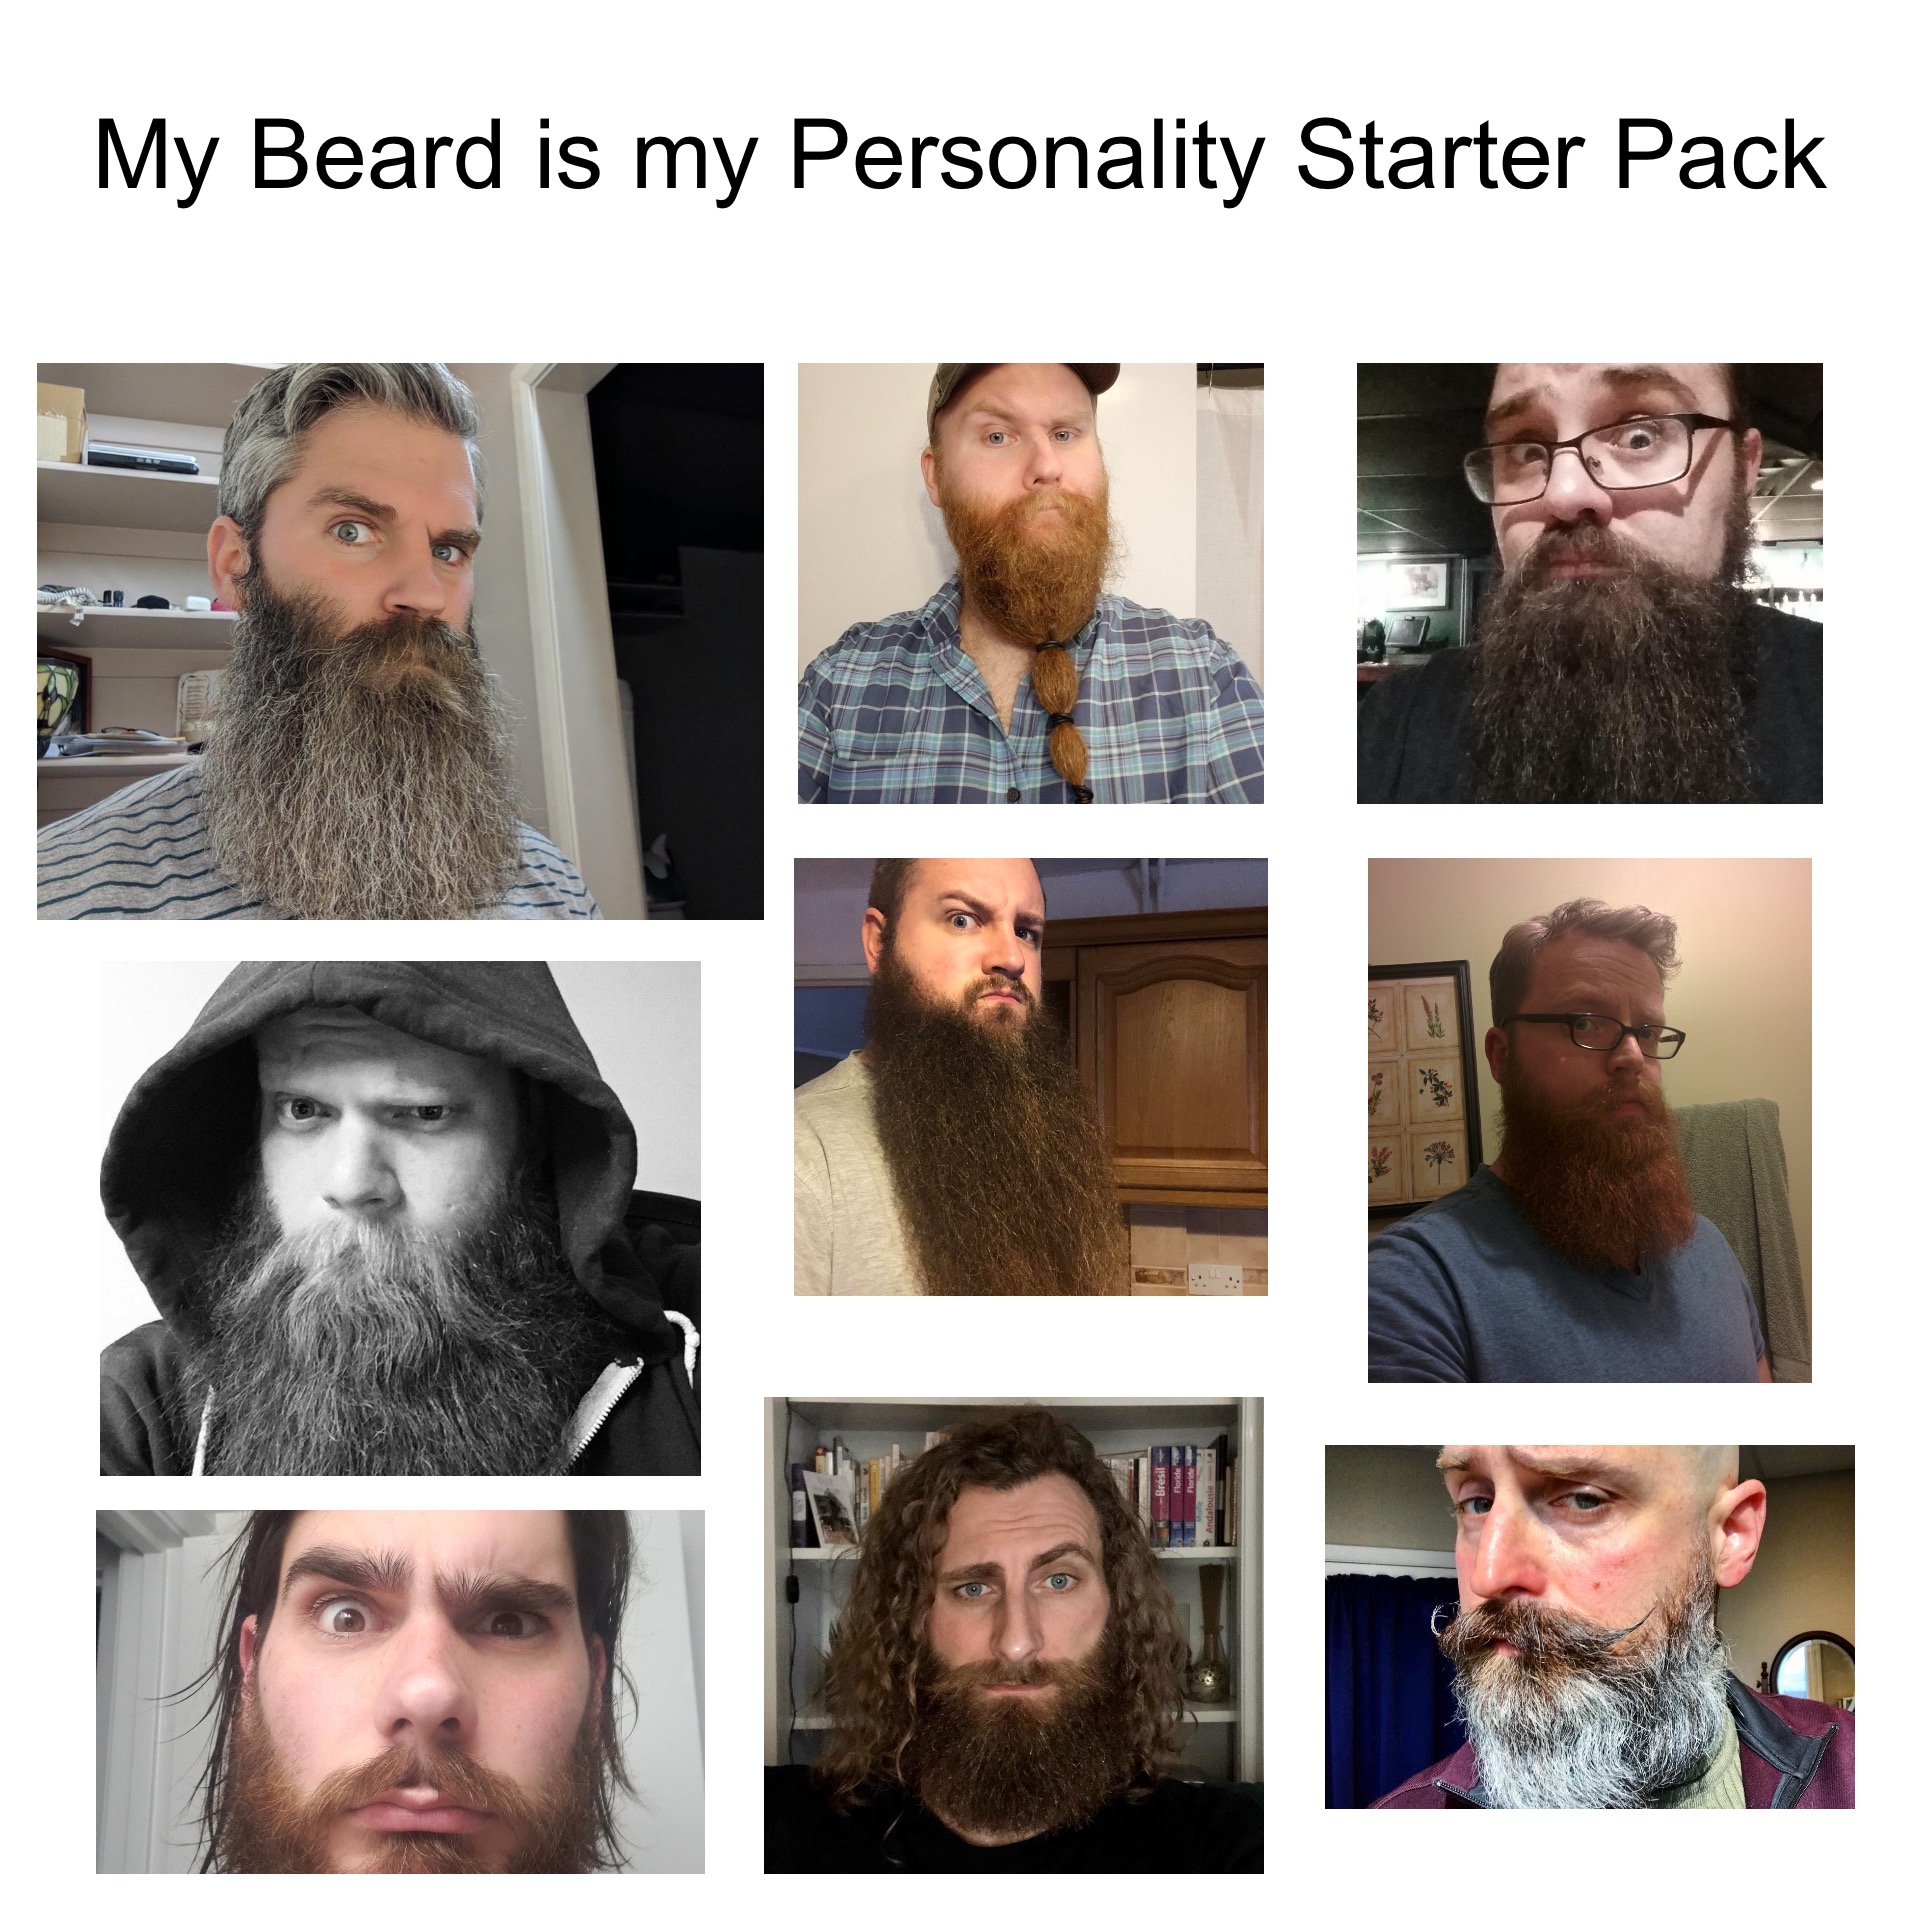 And+the+beard+is+good.